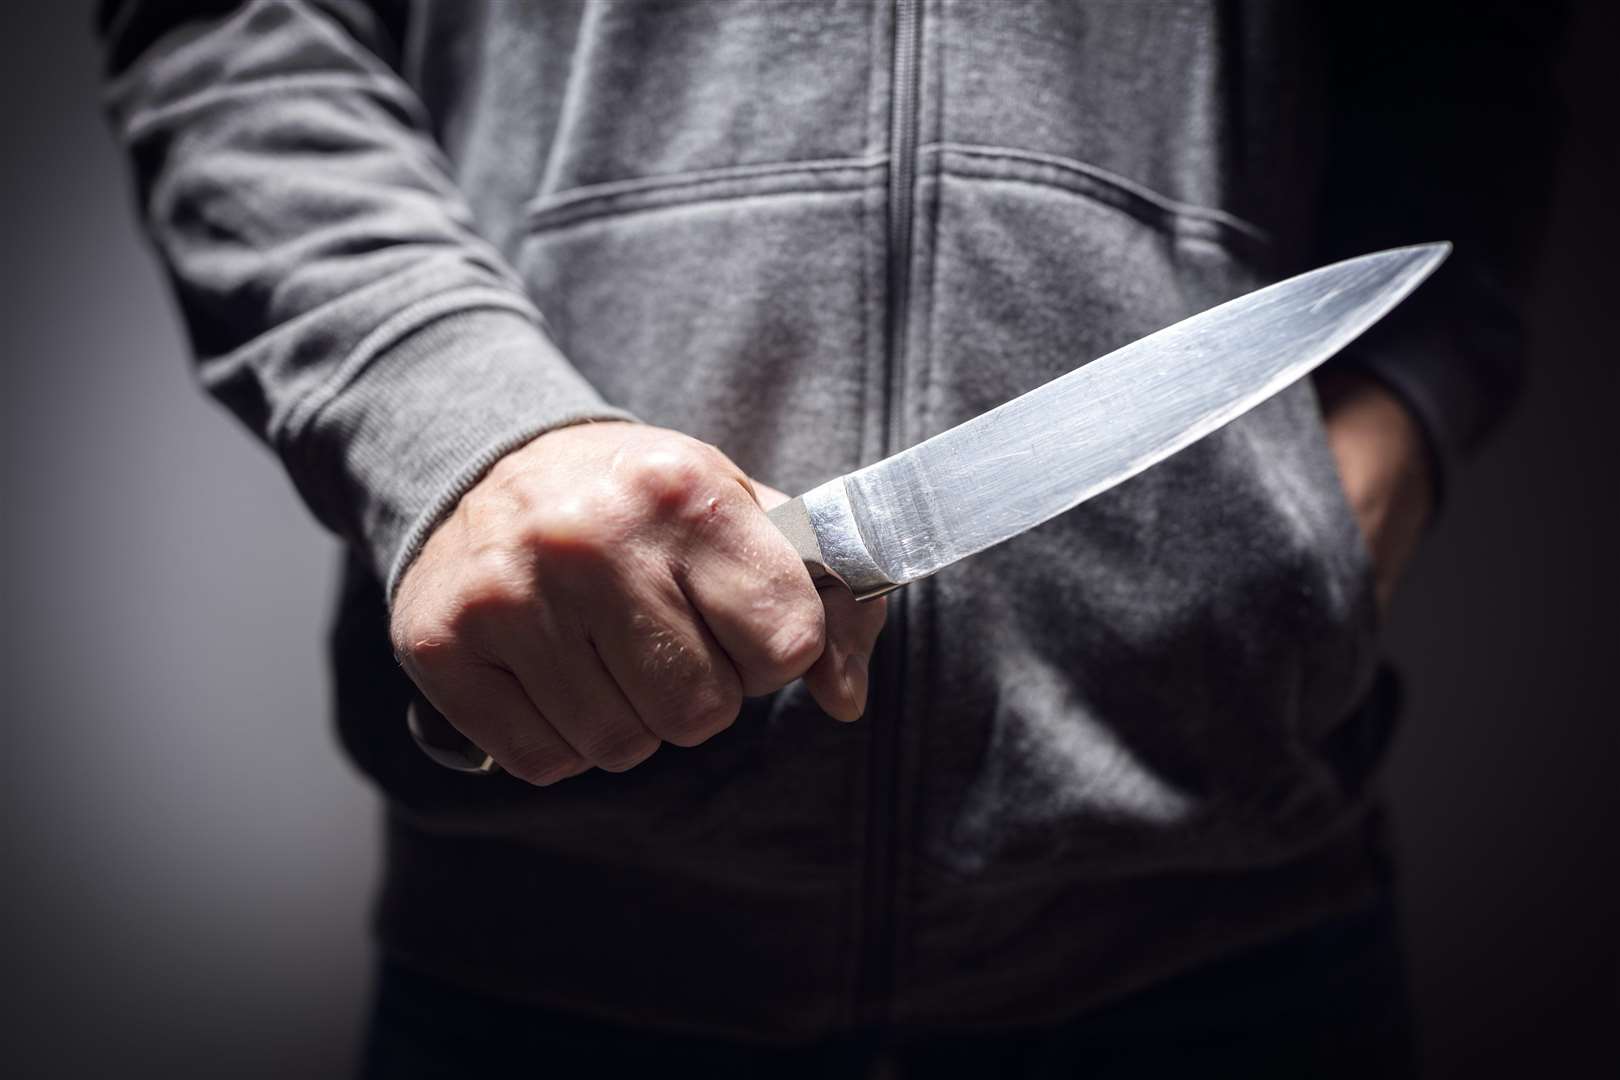 Knife crime in Gravesend and Dartford increase by nearly 50% last year